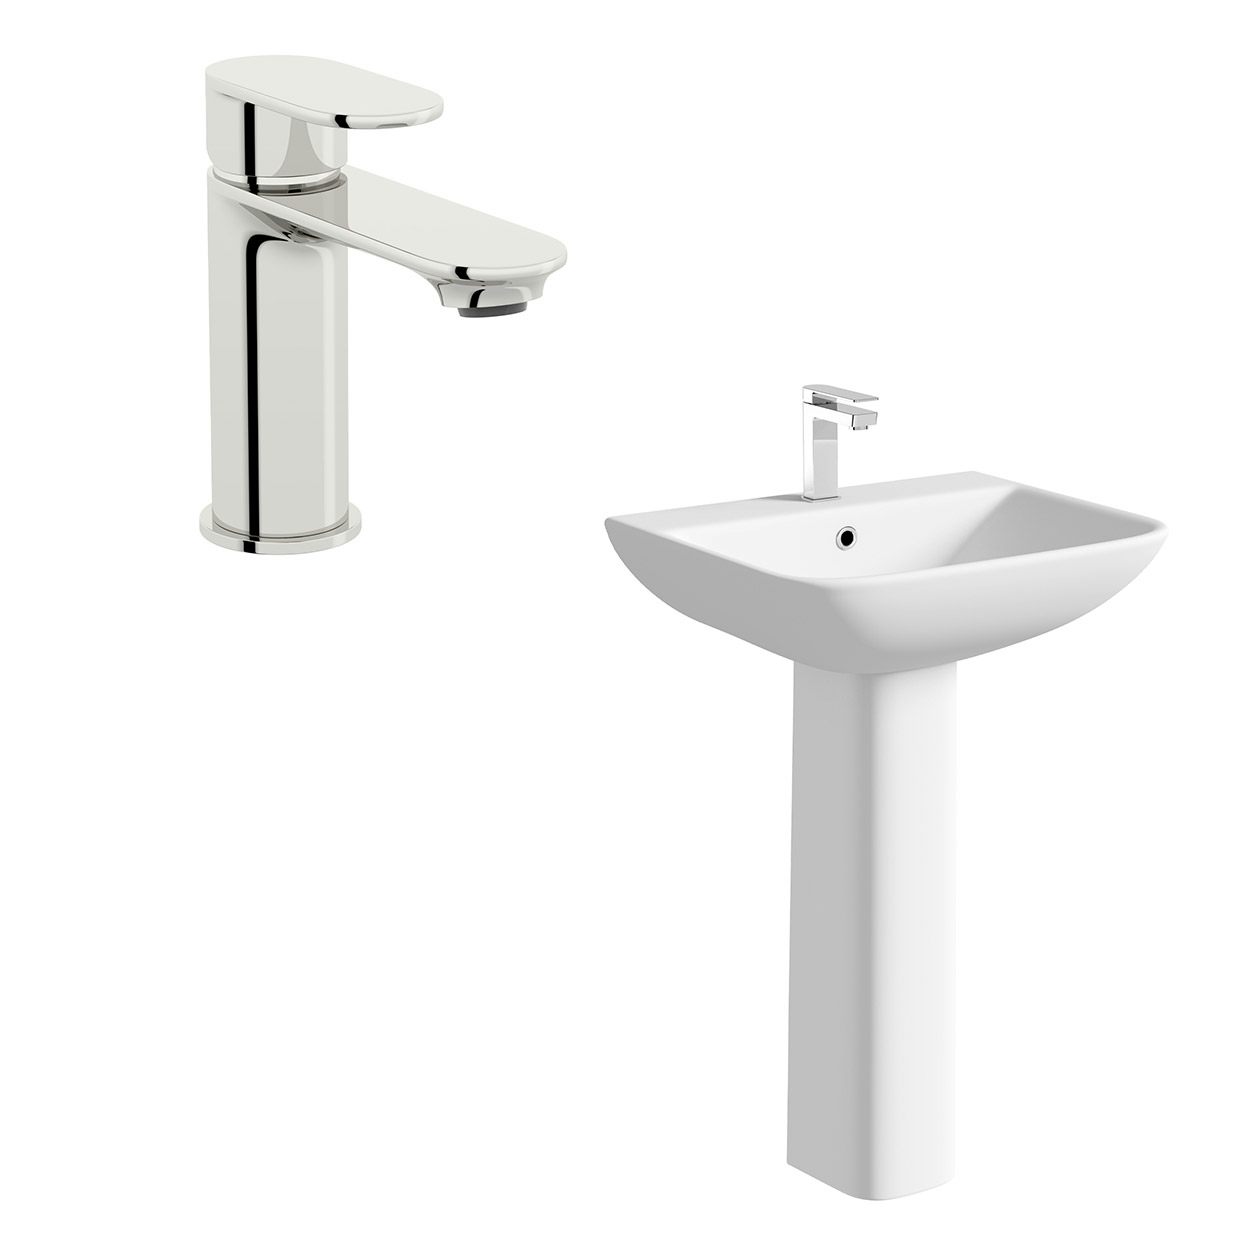 Orchard Derwent square 1 tap hole full pedestal basin 550mm with basin mixer tap